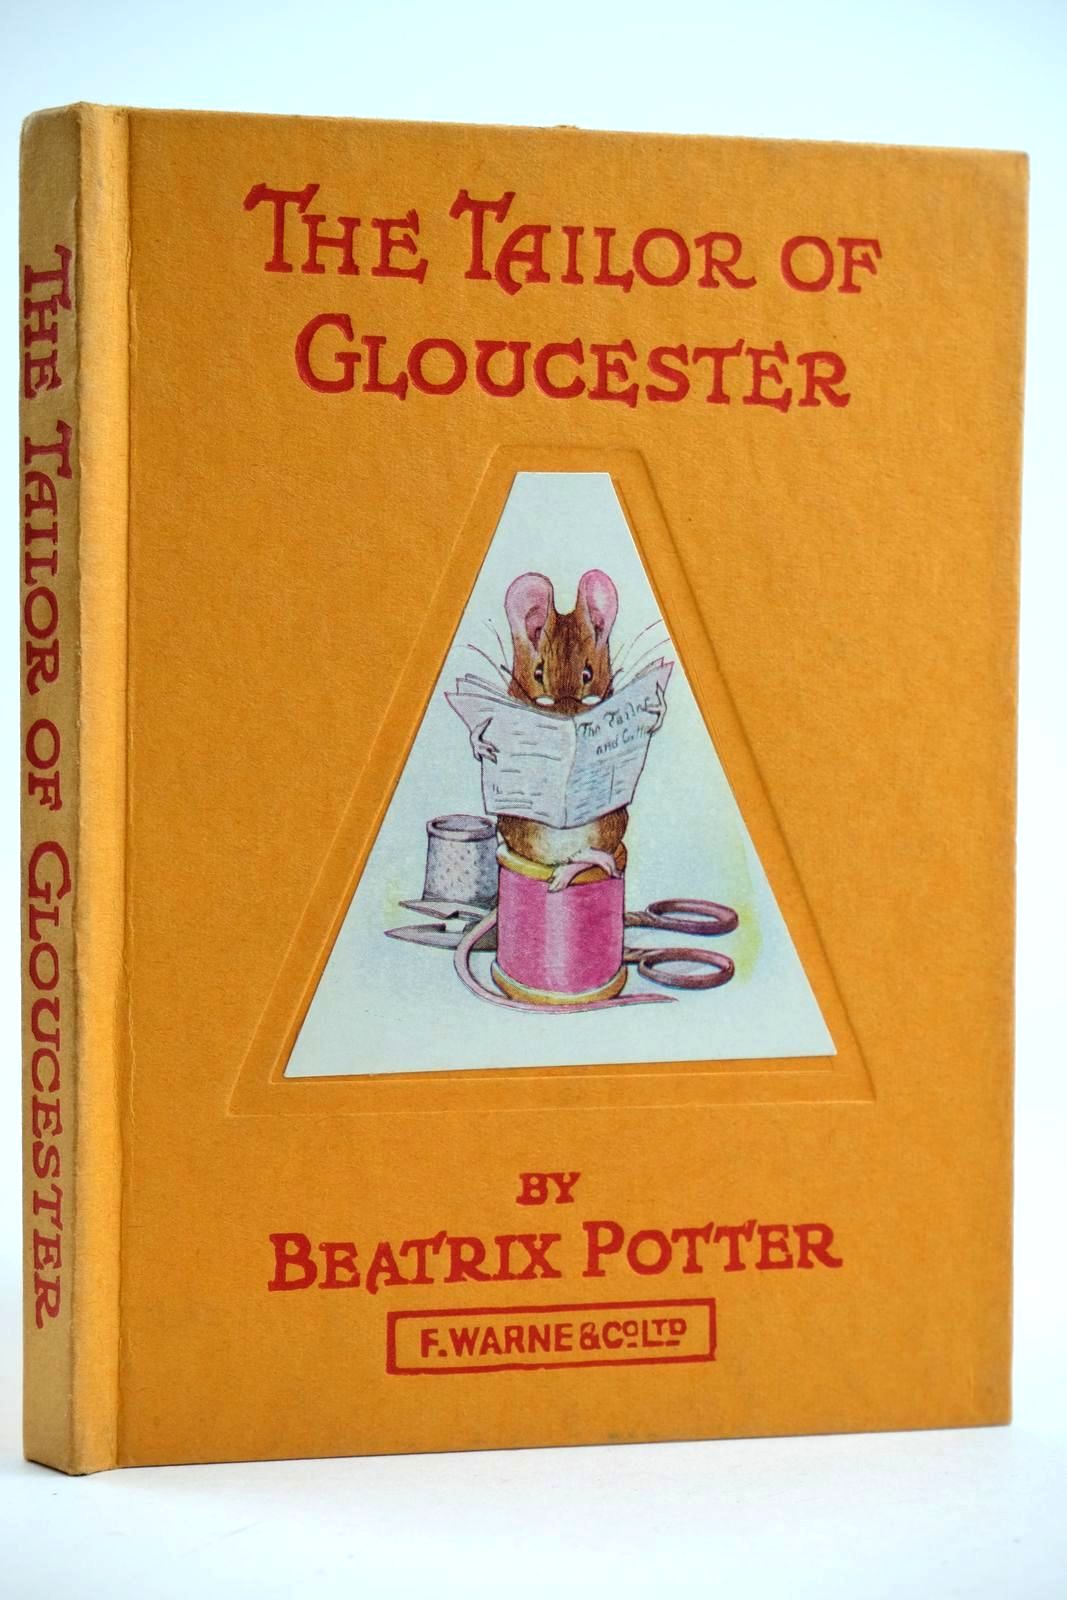 Photo of THE TAILOR OF GLOUCESTER written by Potter, Beatrix illustrated by Potter, Beatrix published by Frederick Warne & Co Ltd. (STOCK CODE: 2132068)  for sale by Stella & Rose's Books